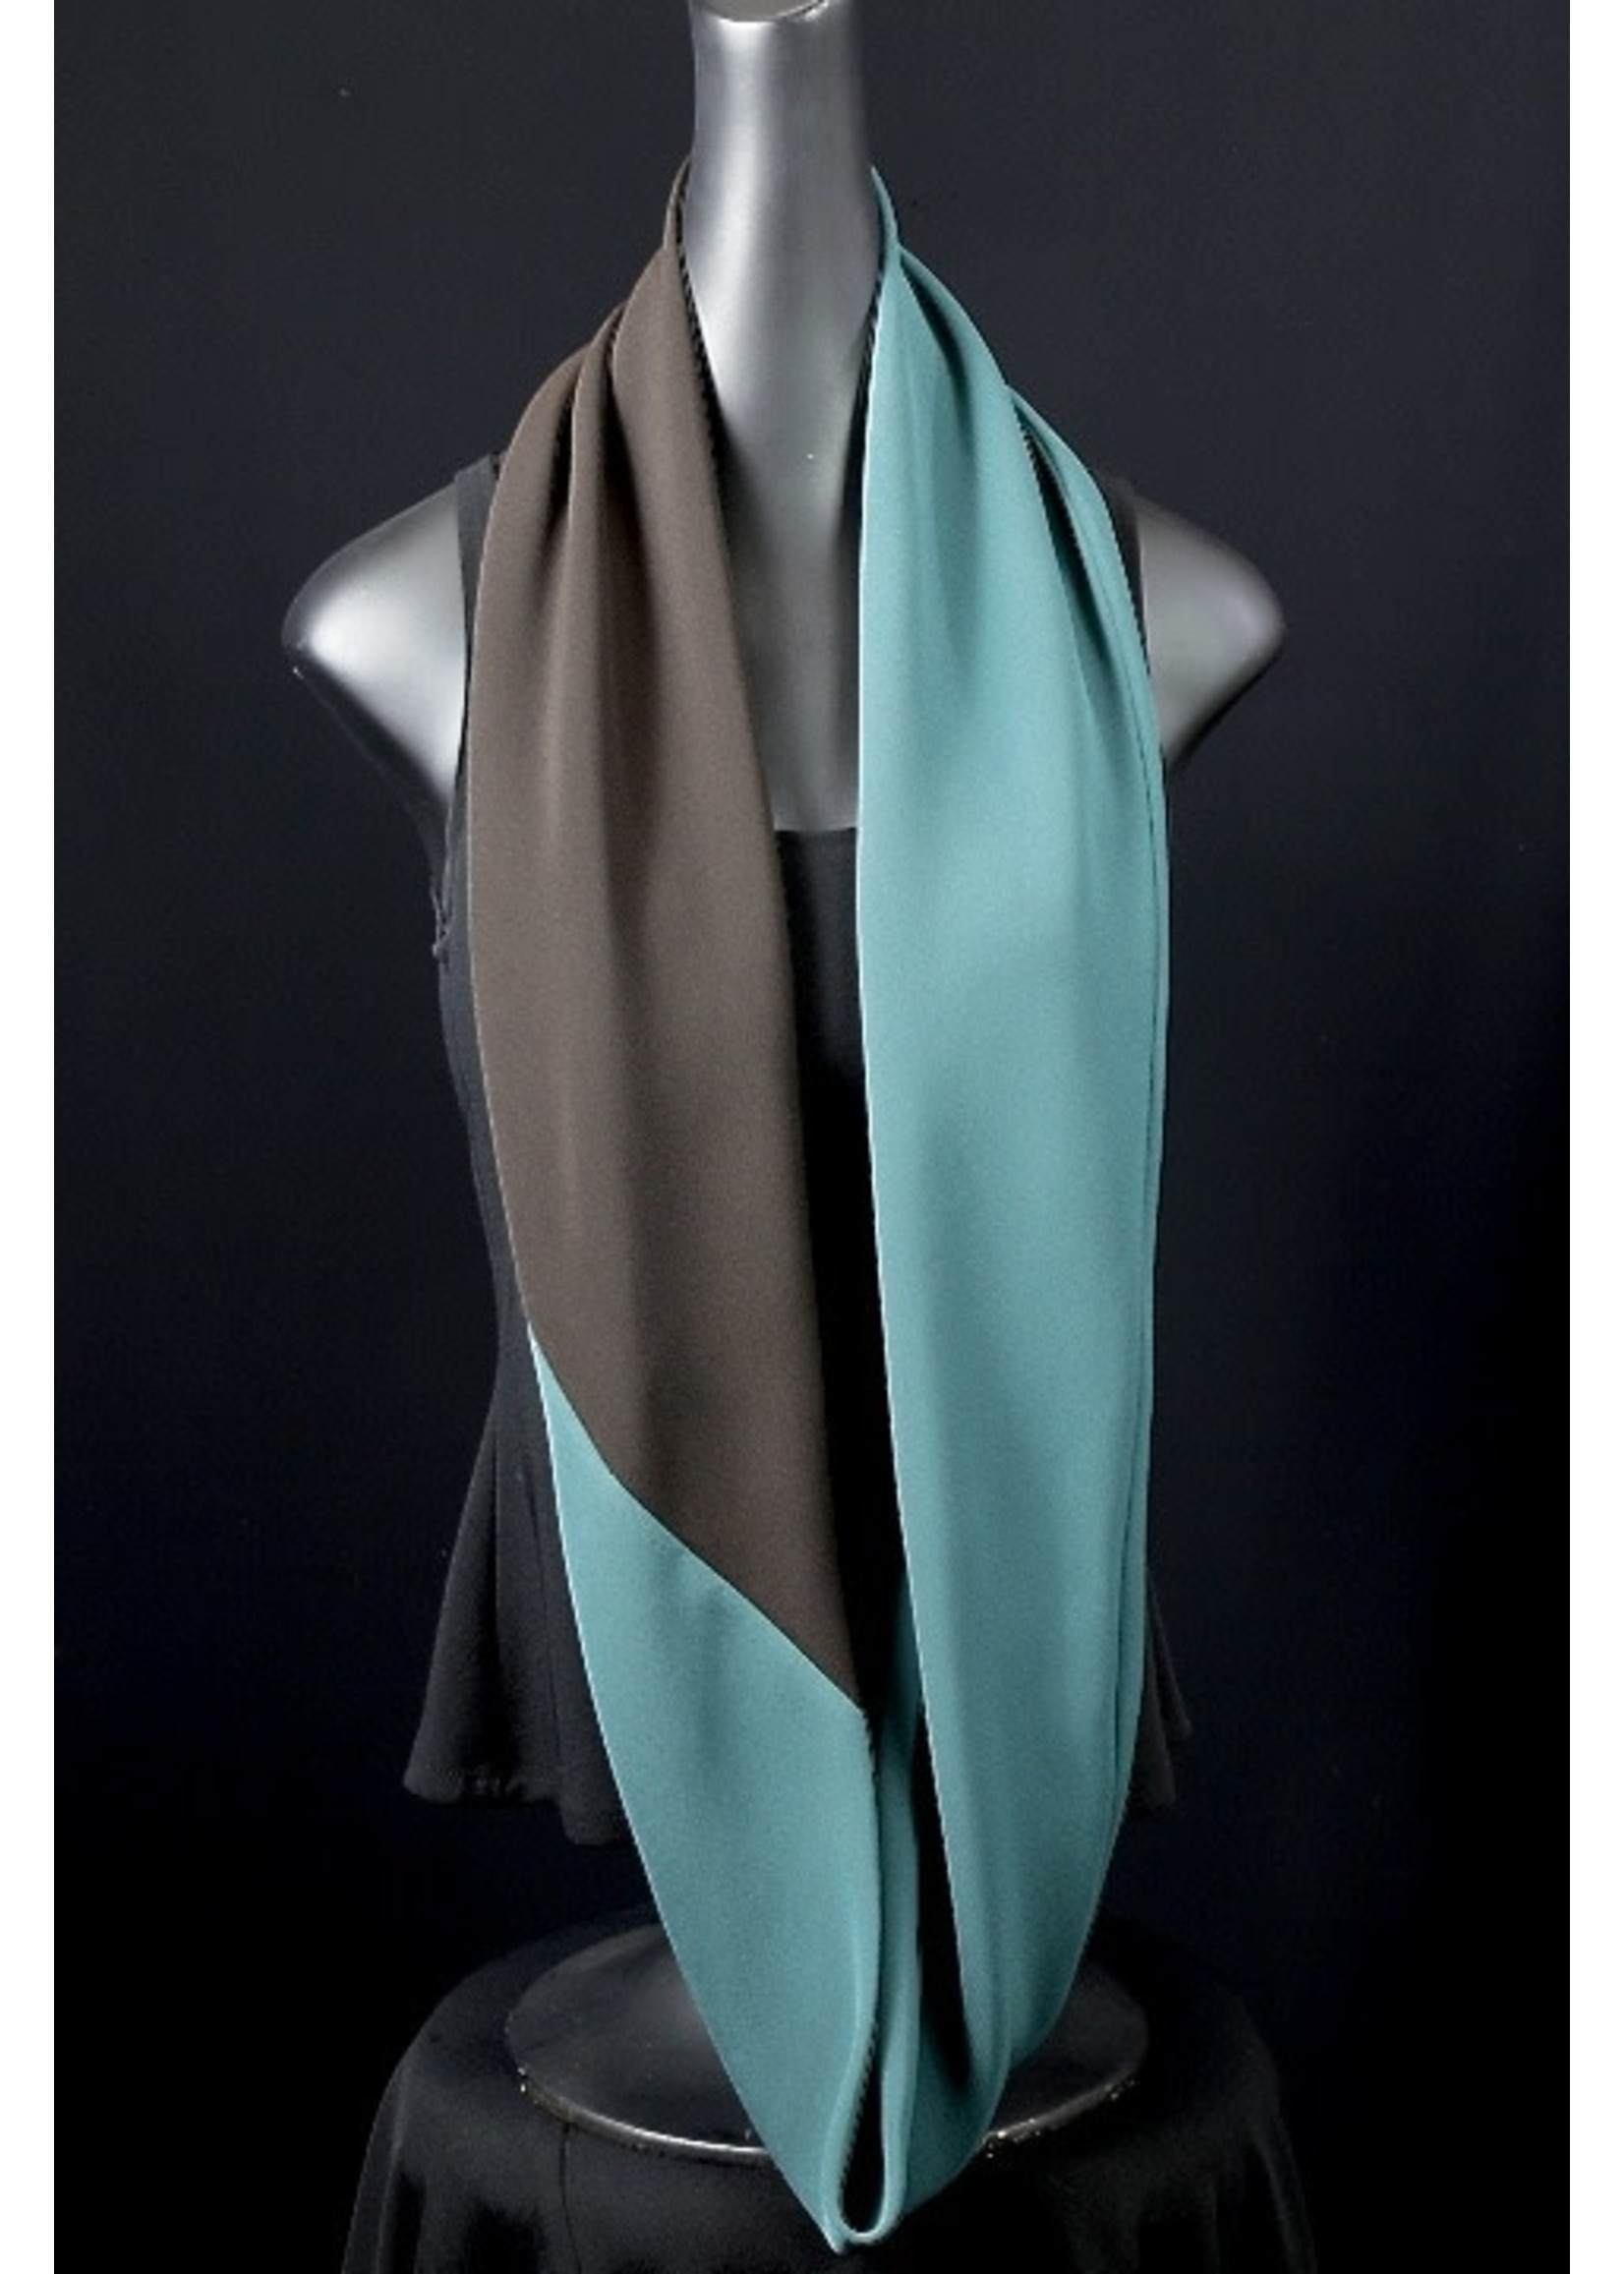 Scarf SH933-MS062/MS061-Teal & Chocolate infinity scarf